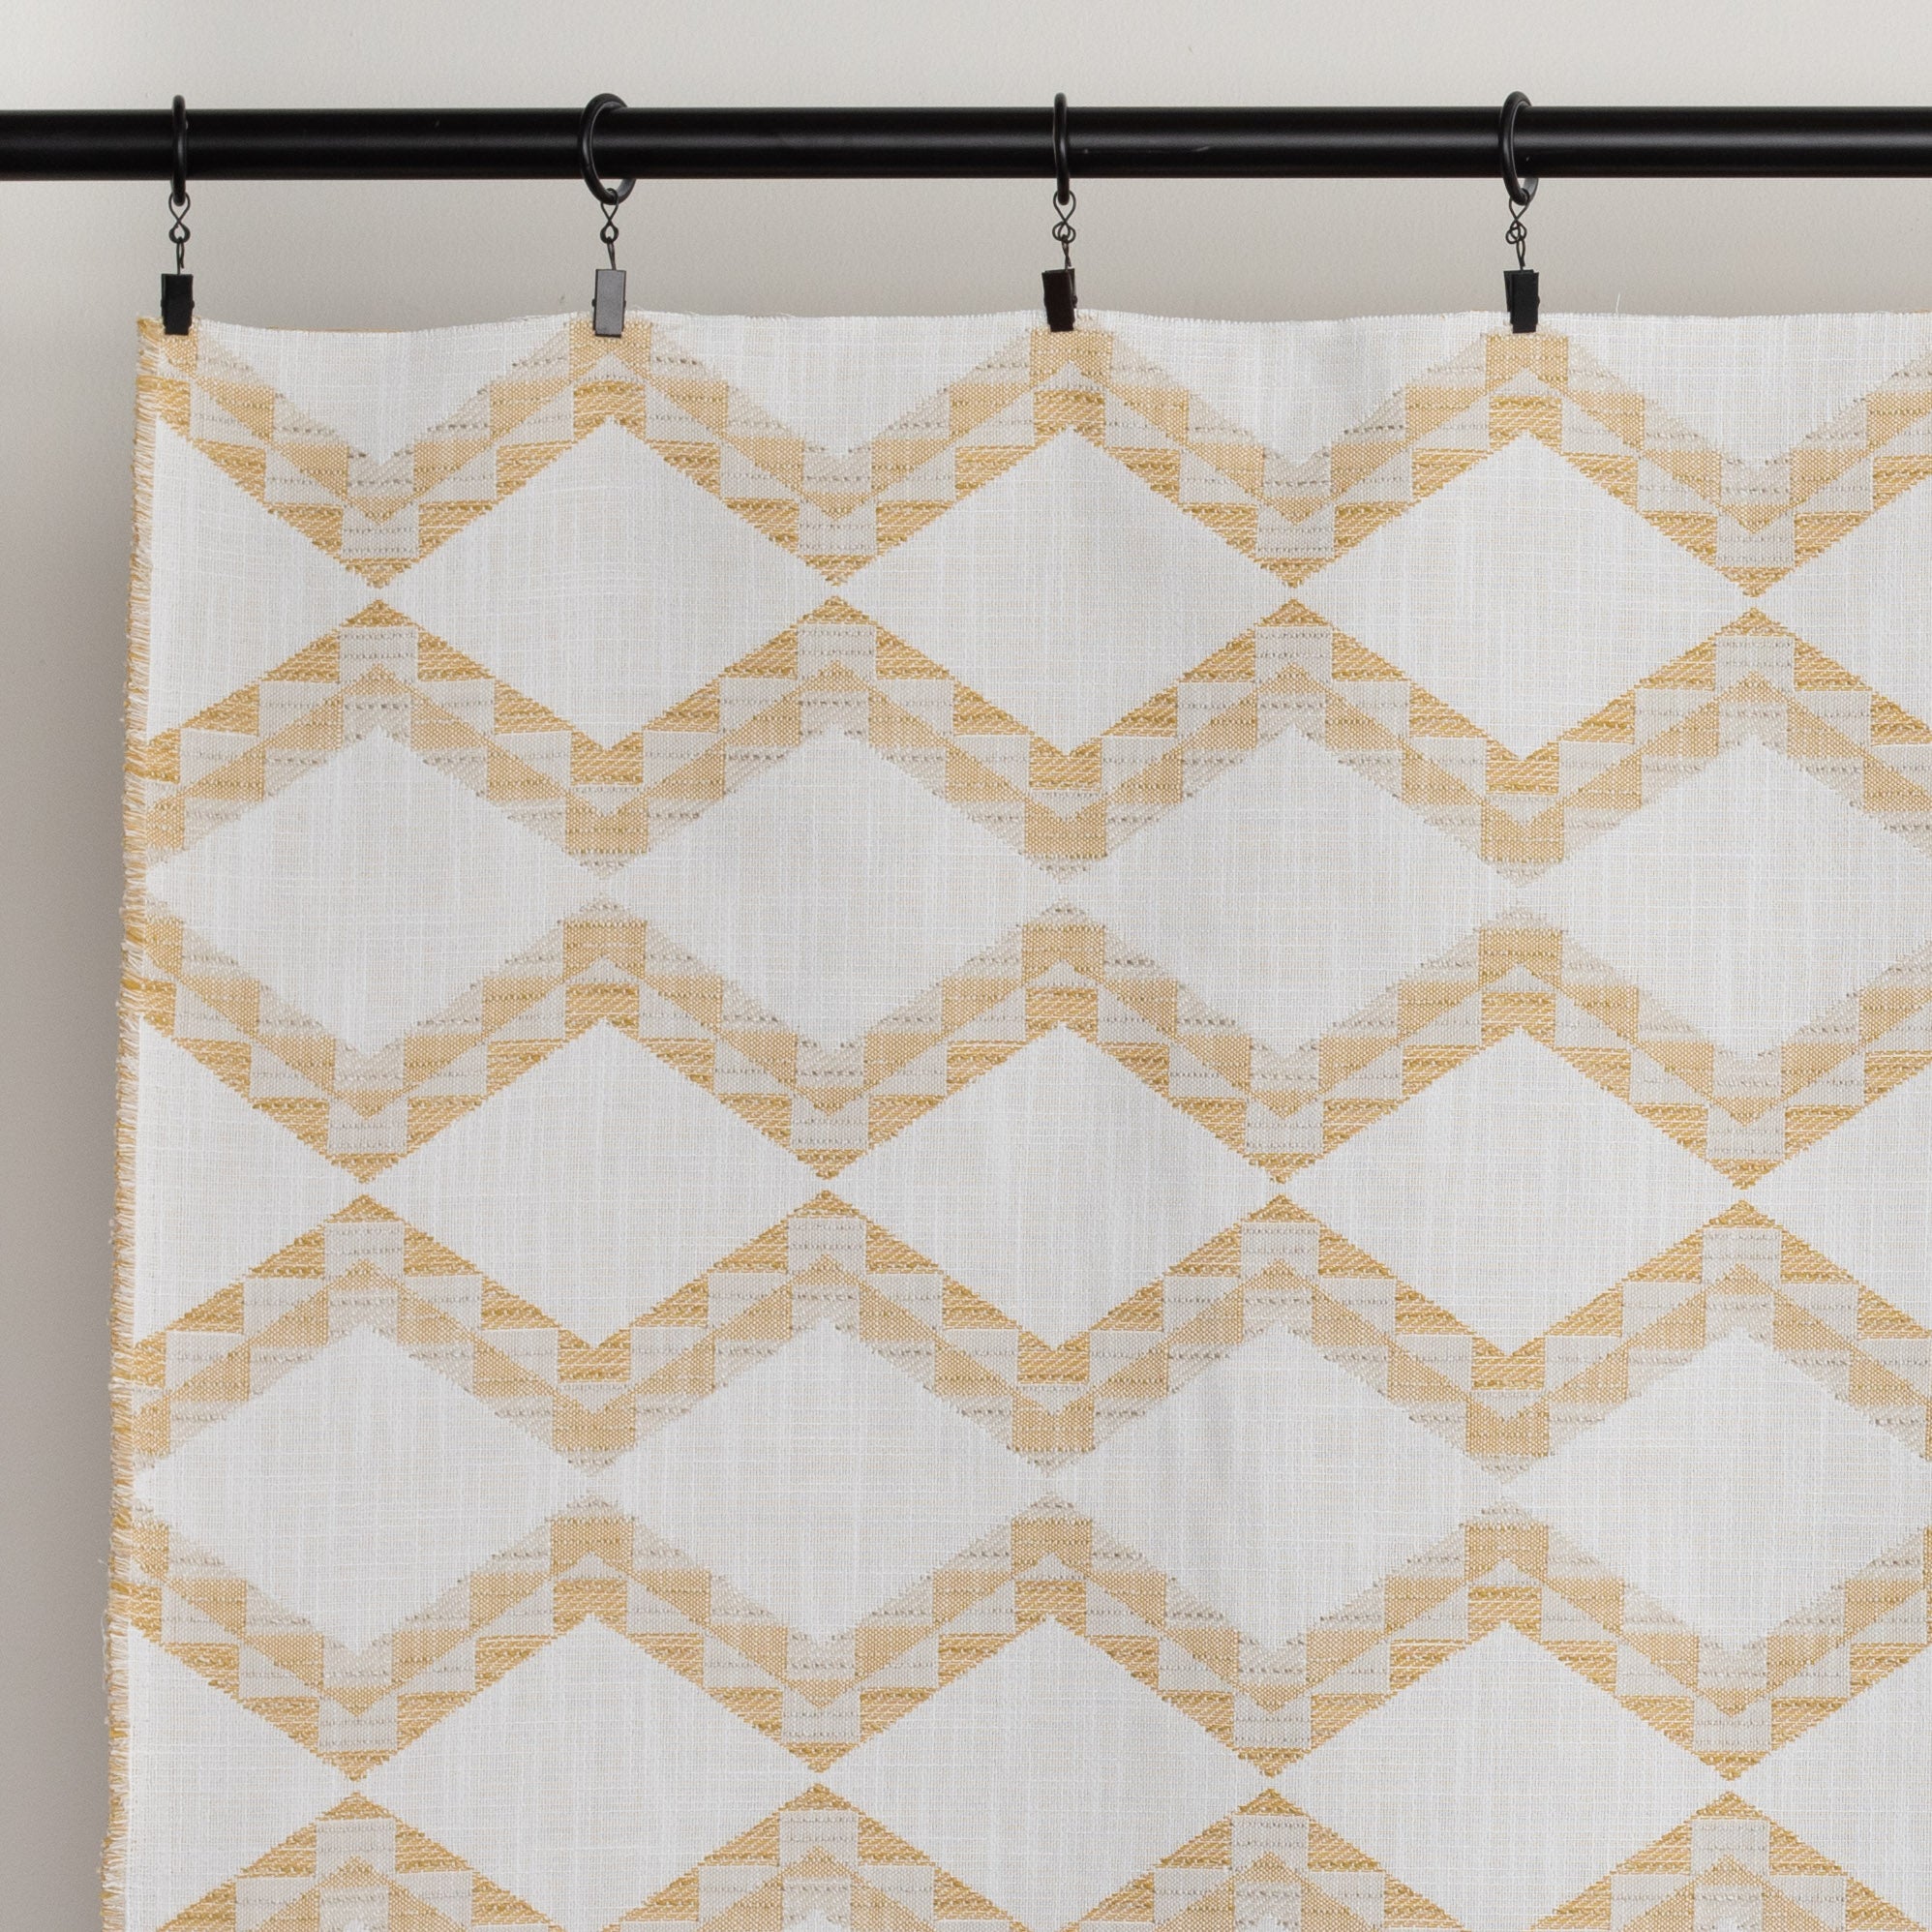 Estevan Amber yellow and cream large scale zigzag and diamond pattern indoor outdoor fabric : view 2